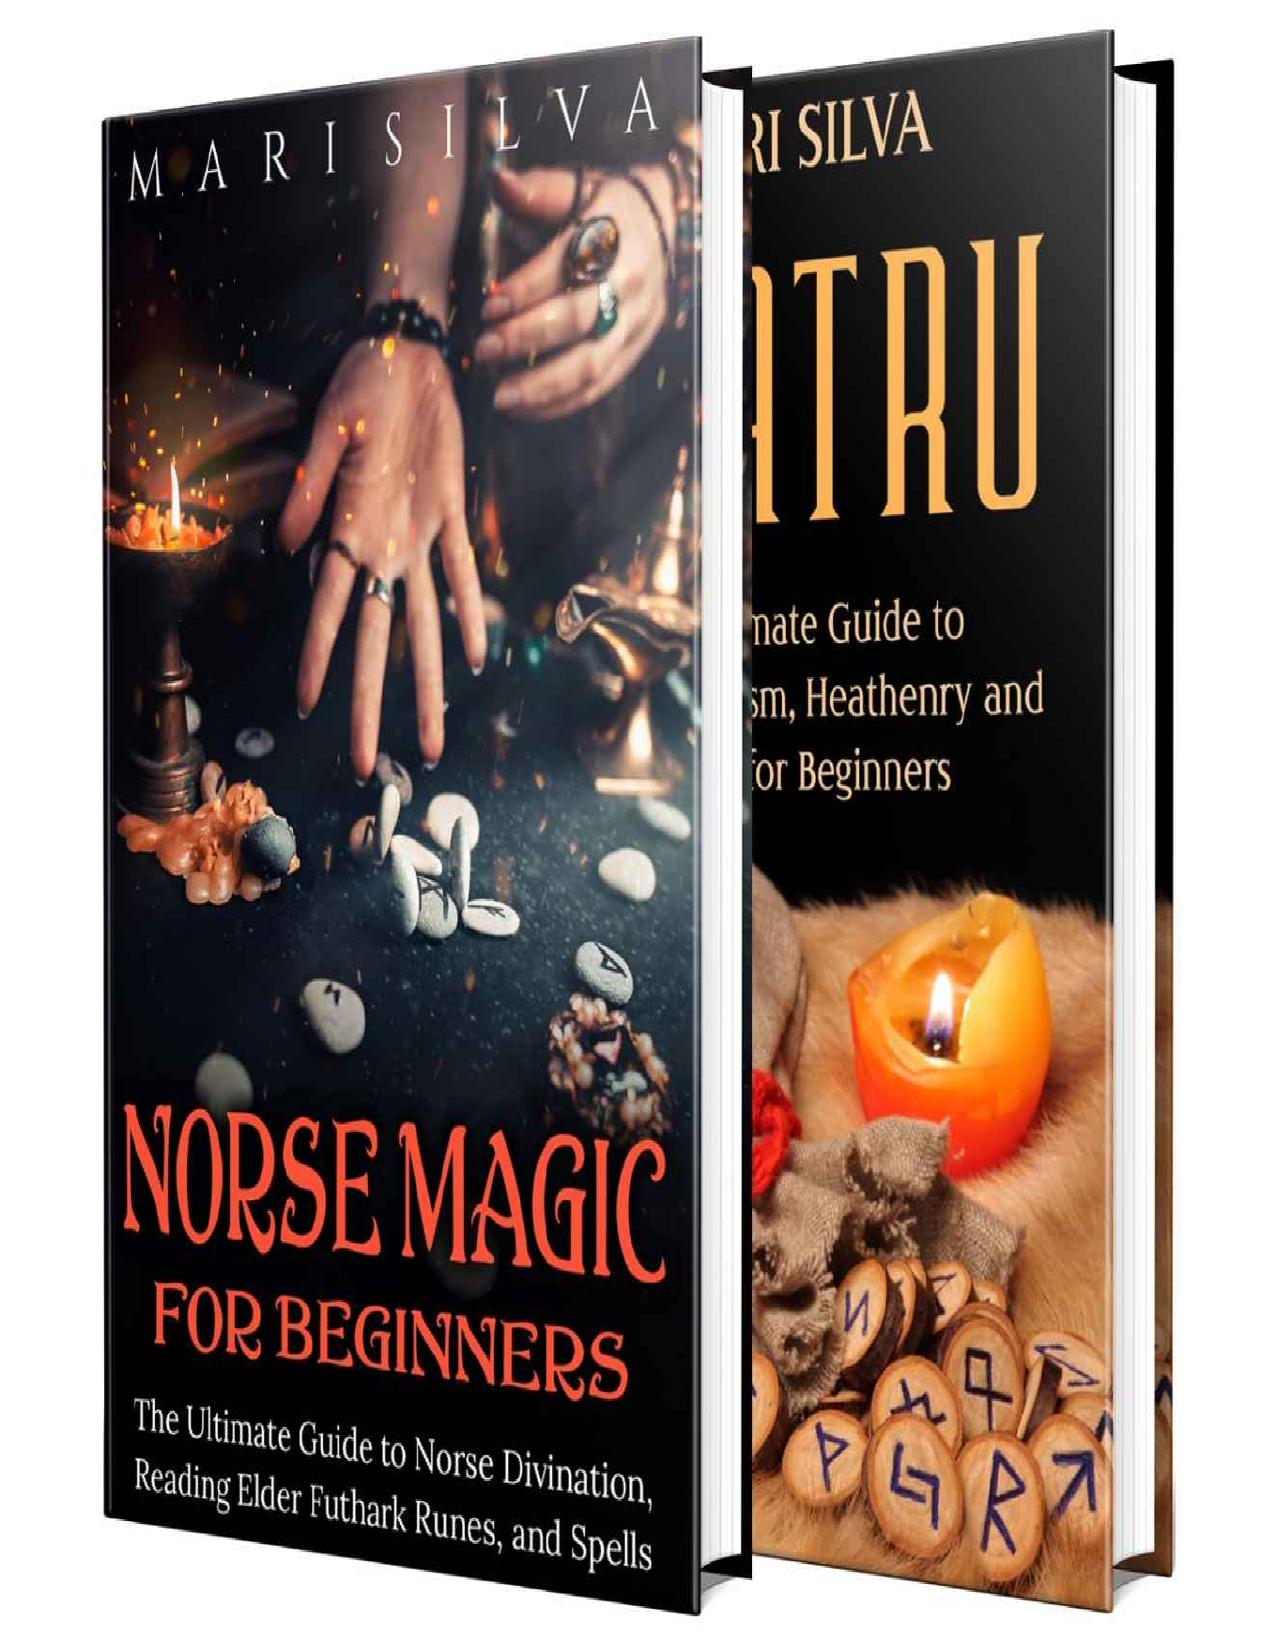 Norse Magic and Asatru: An Essential Guide to Norse Divination, Elder Futhark Runes, Paganism, and Heathenry for Beginners